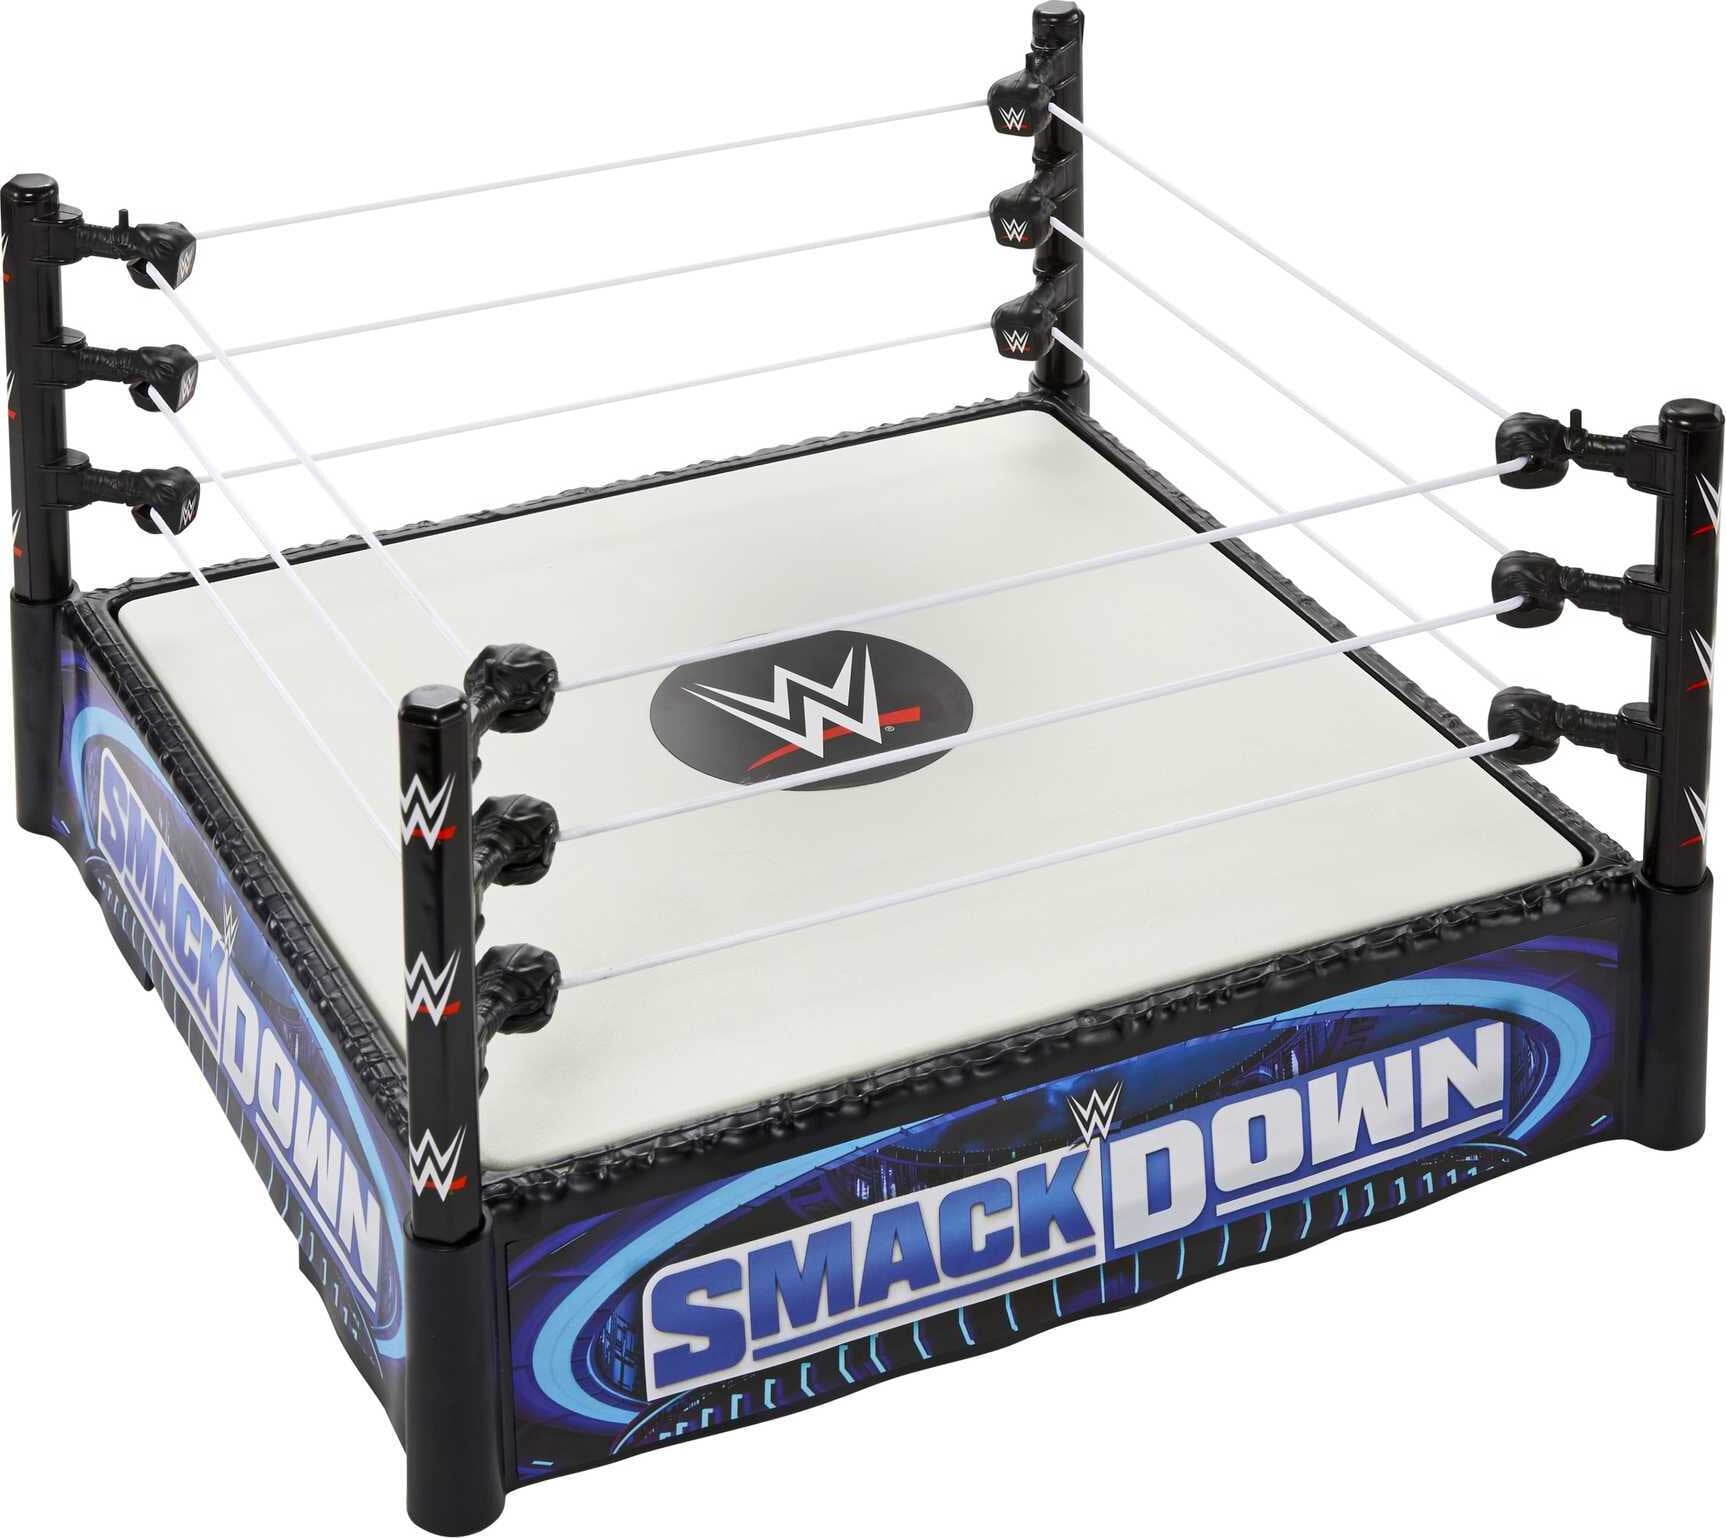 Step into the ring with launching ropes and a spring-loaded mat to battle  for WWE® action figure championships.